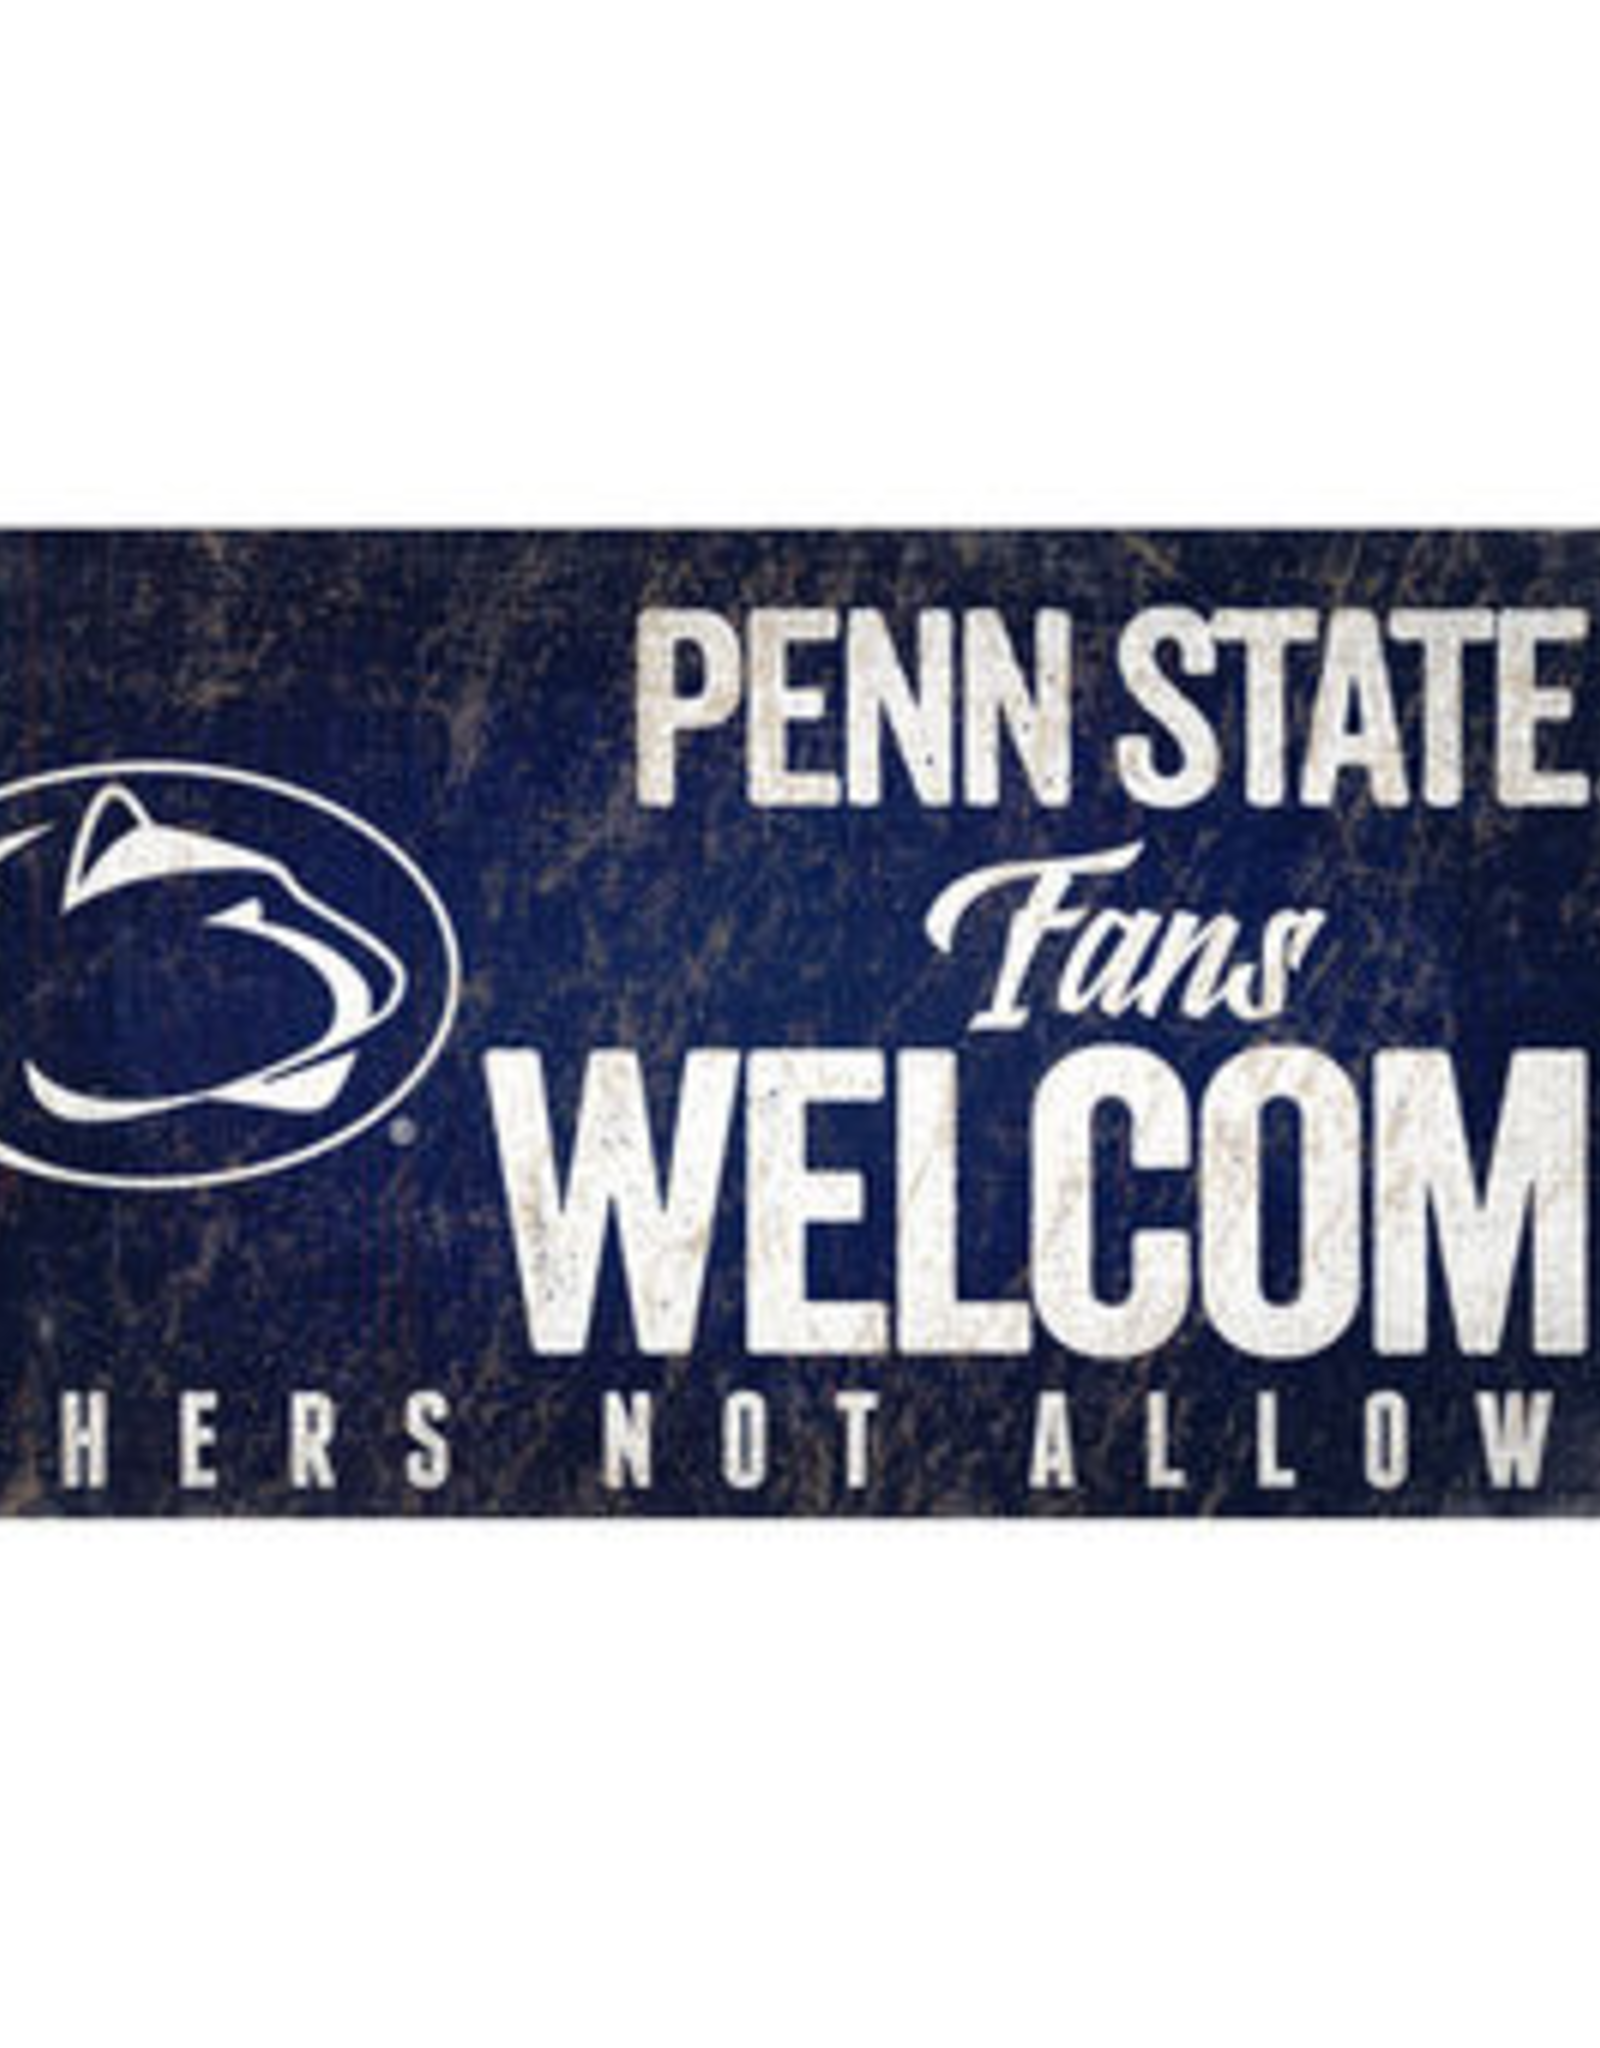 FAN CREATIONS Penn State Fans Welcome Wood Sign